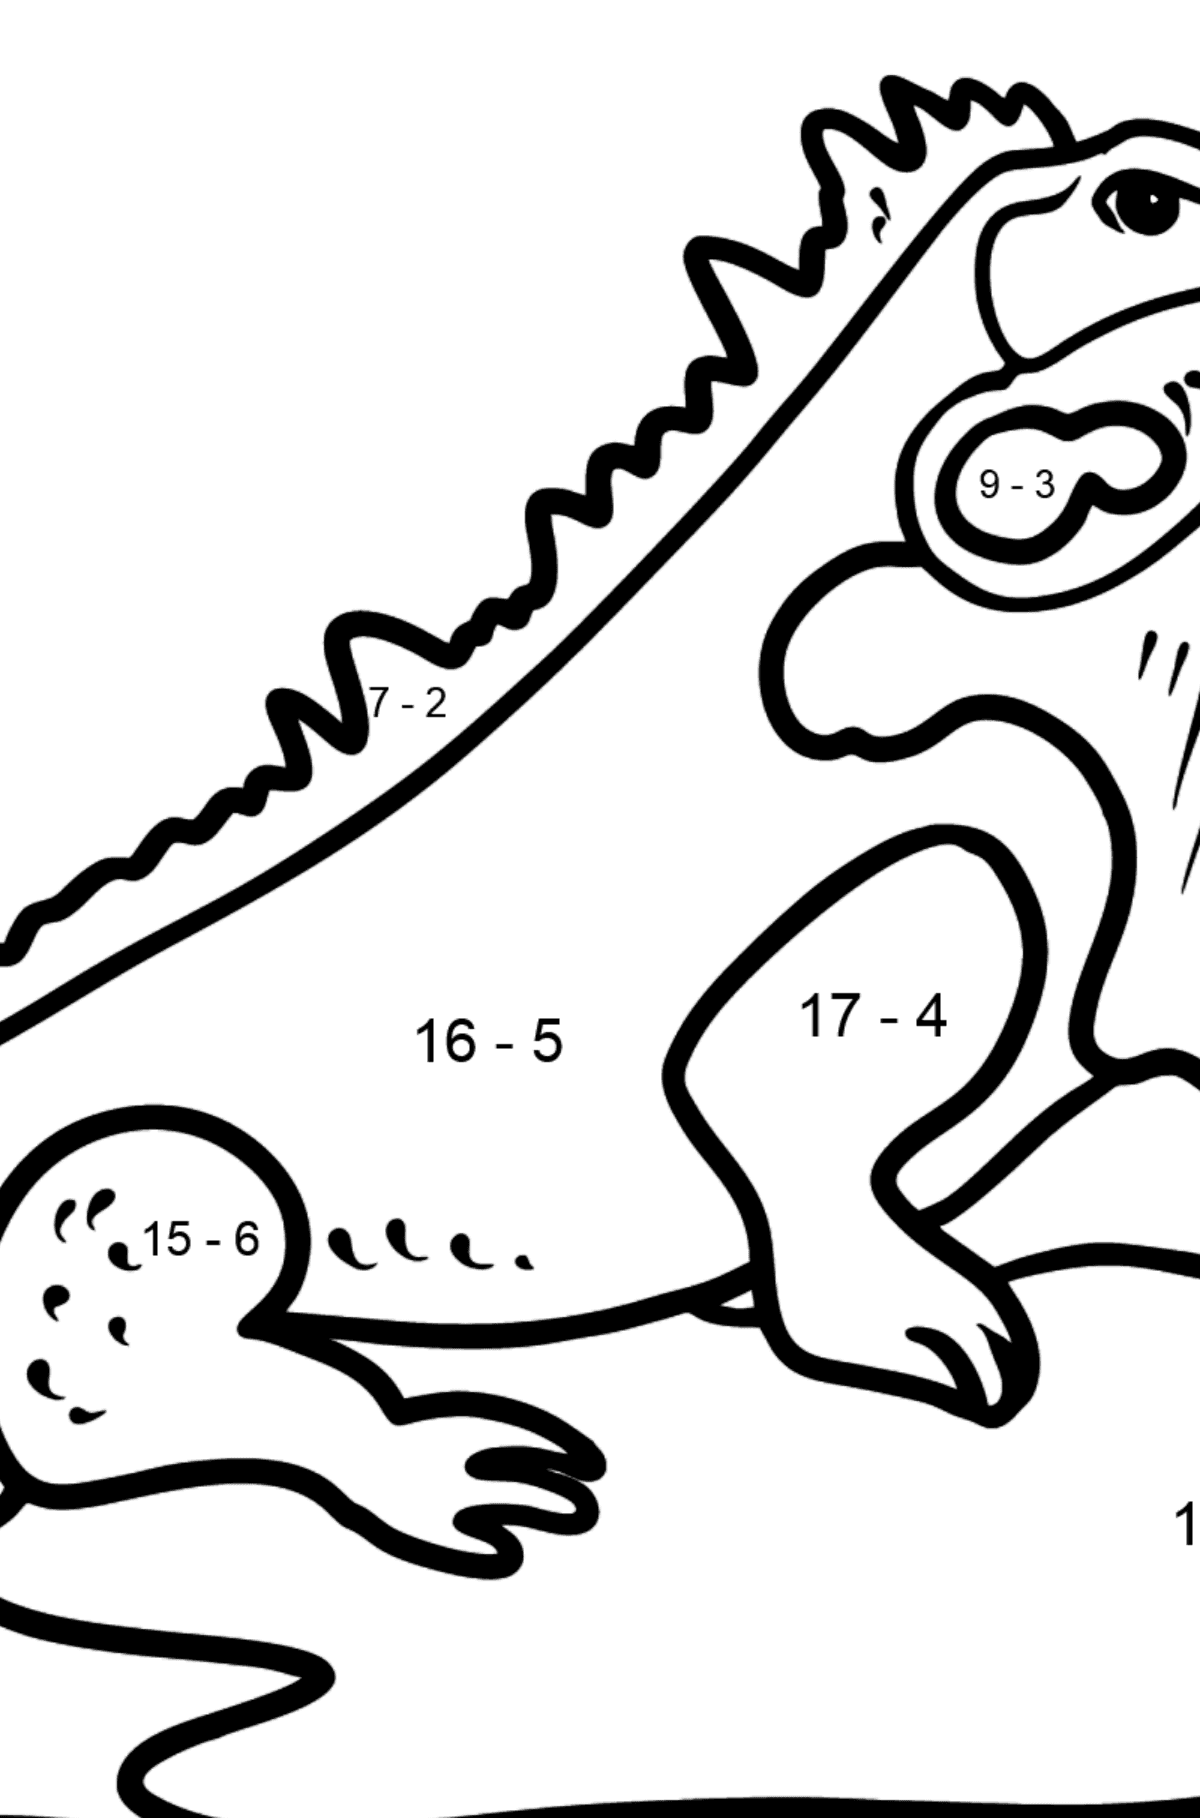 Spanish Letter I coloring pages - IGUANA - Math Coloring - Subtraction for Kids